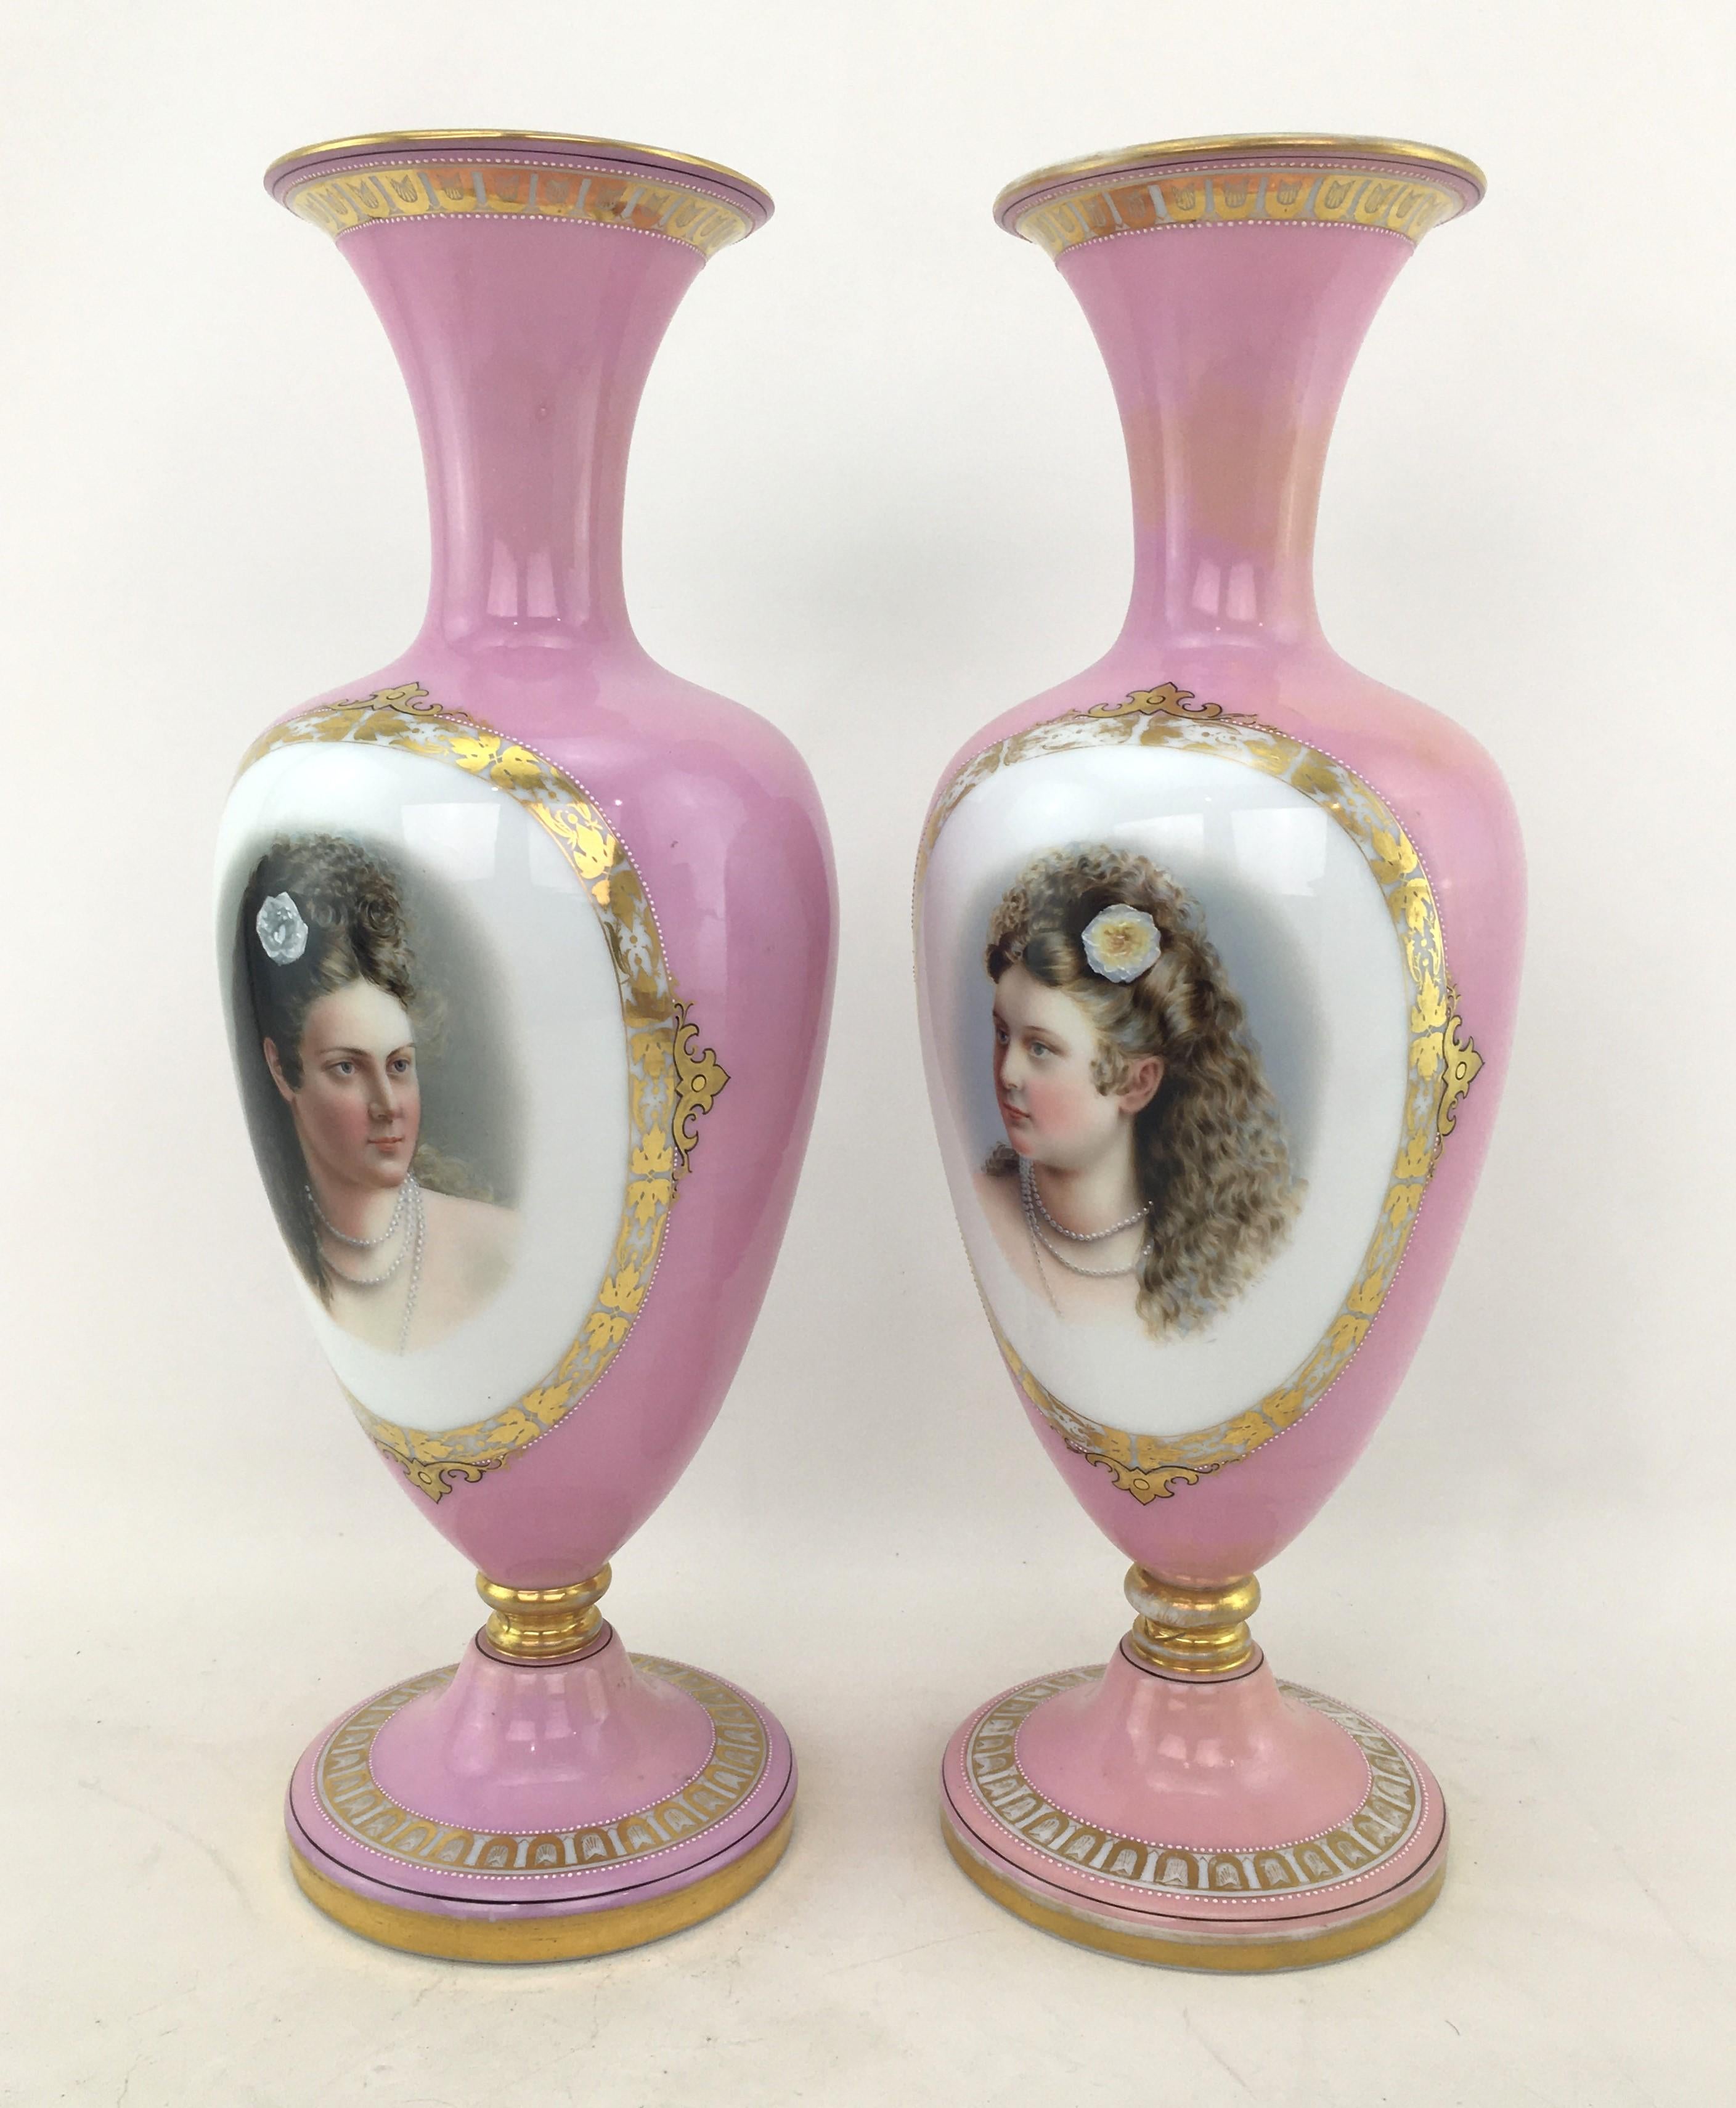 Late Victorian Pair of Large Antique Pink Enameled Glass Portrait Vases with Gilt Accents For Sale